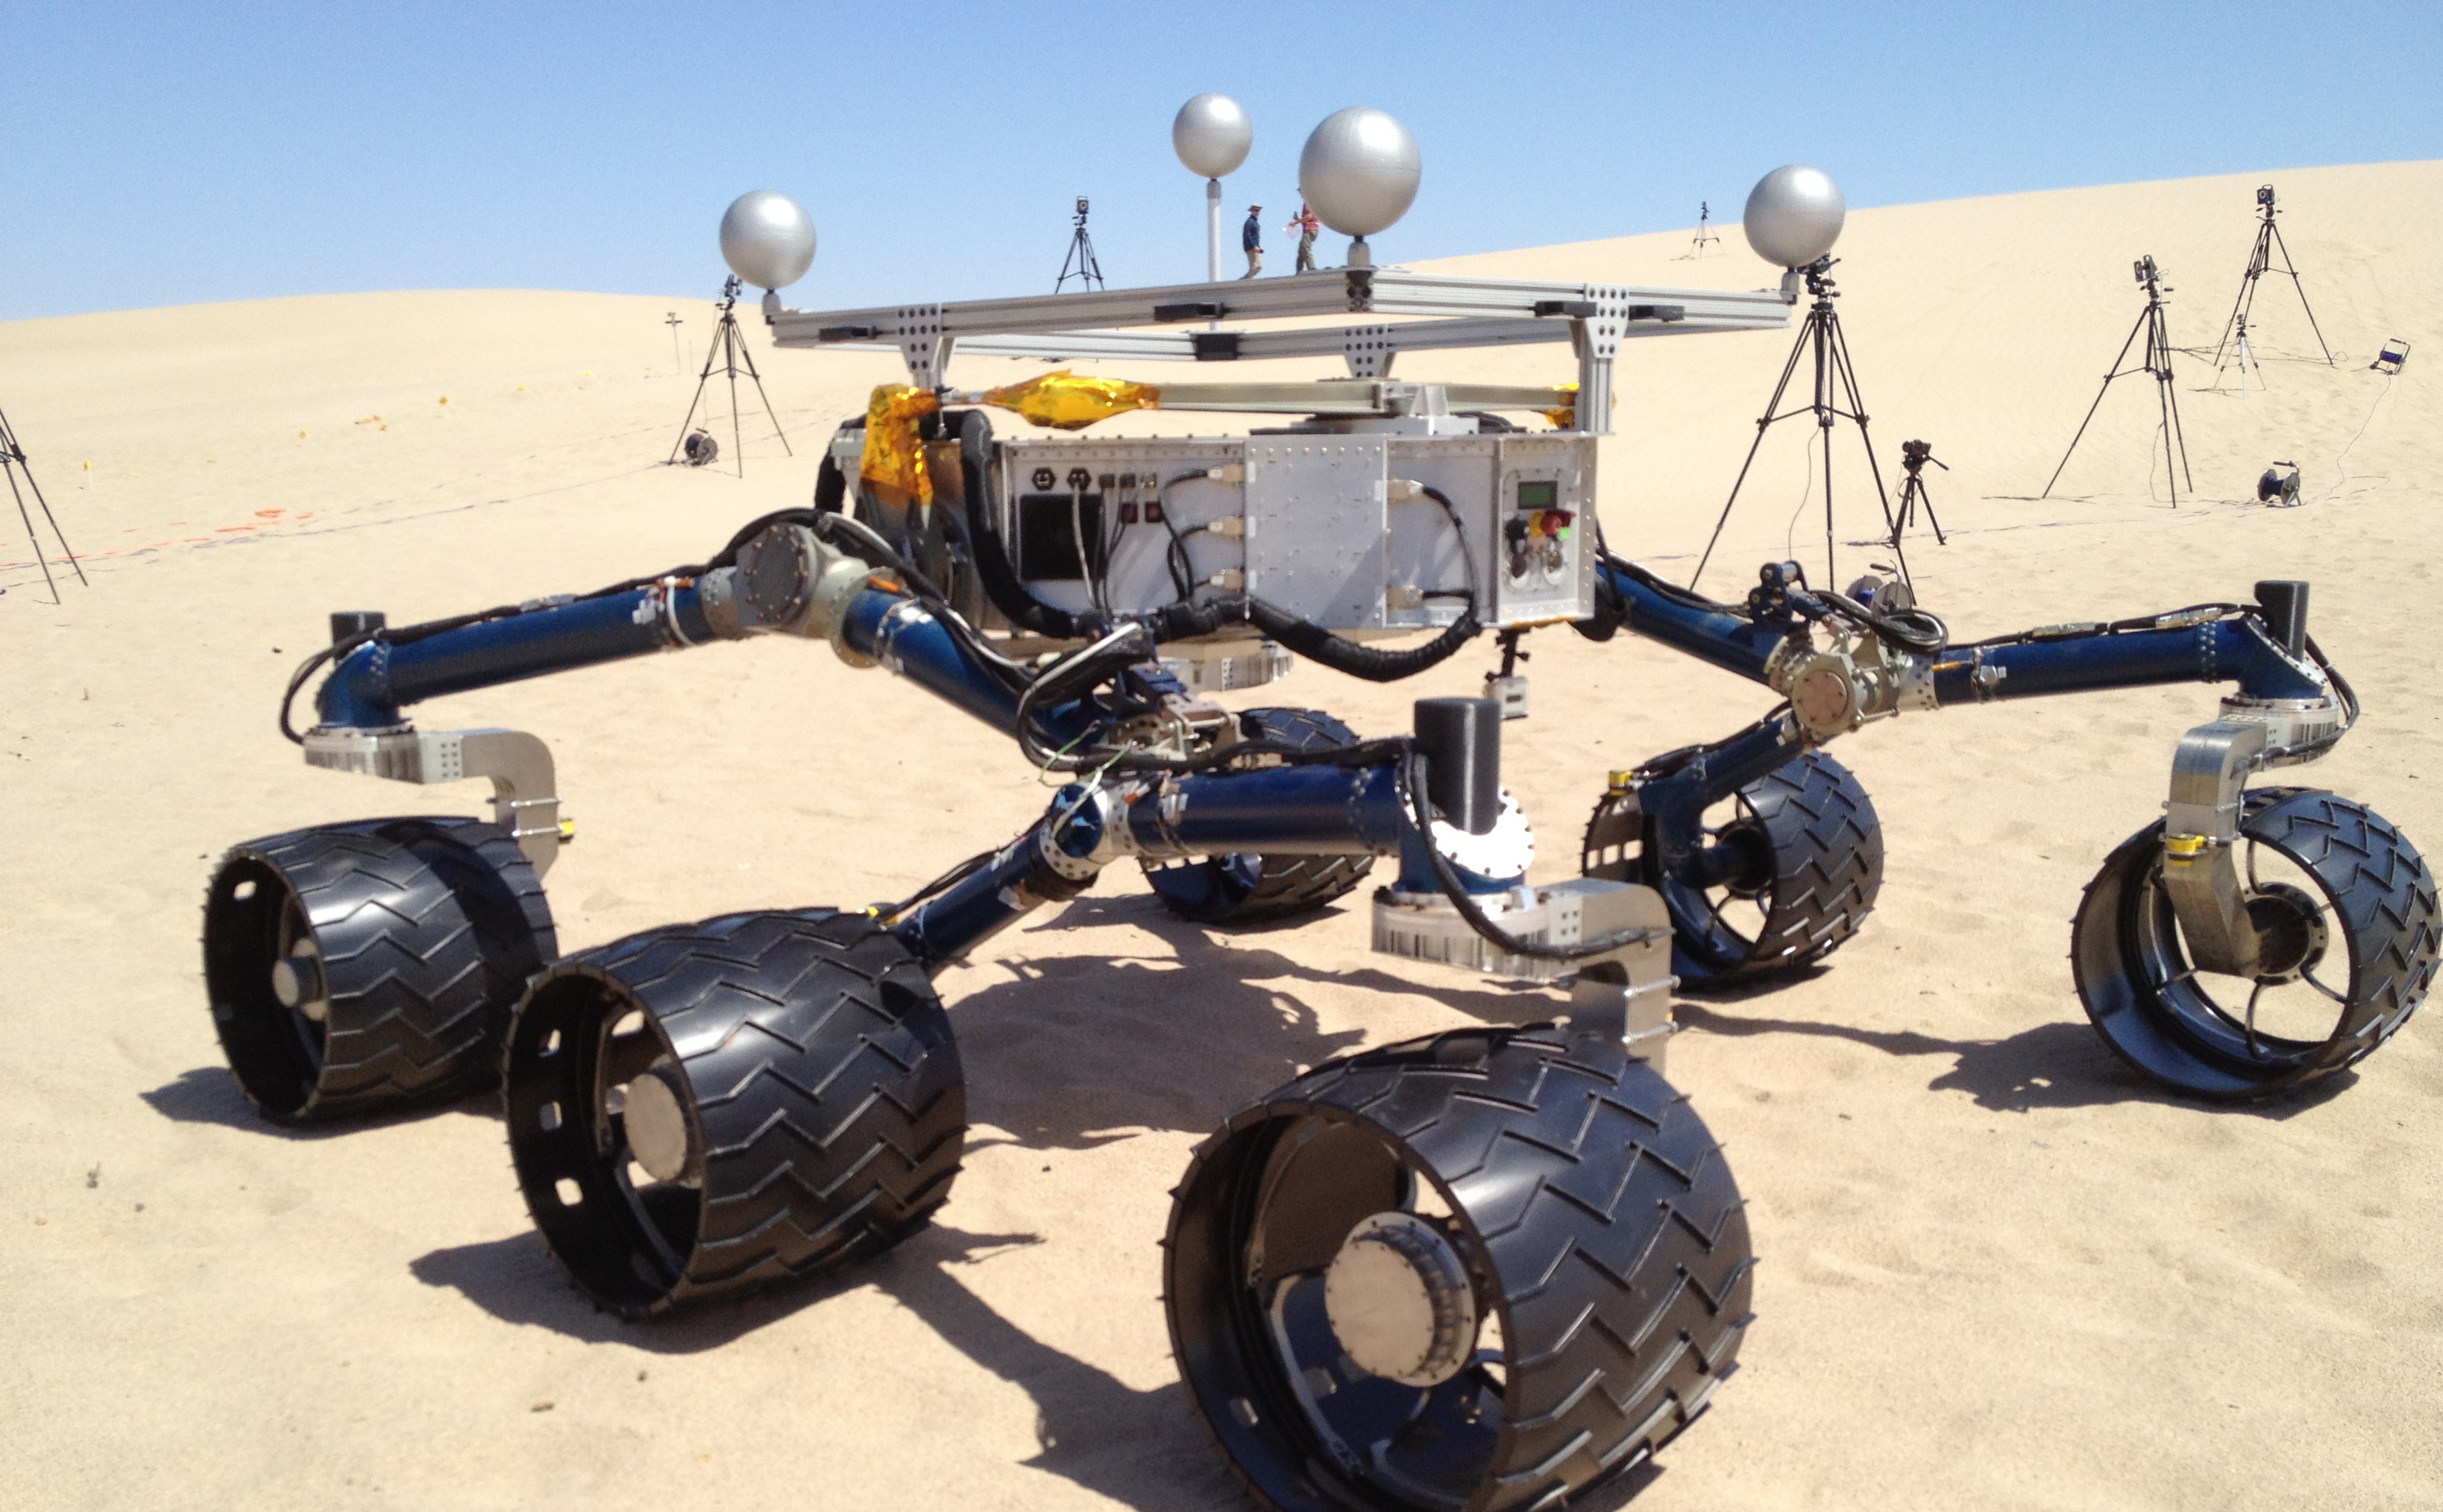 Mars Science Laboratory mission team members ran mobility tests on California sand dunes in early May 2012 in preparation for operating the Curiosity rover, currently en route to Mars, after its landing in Mars' Gale Crater.